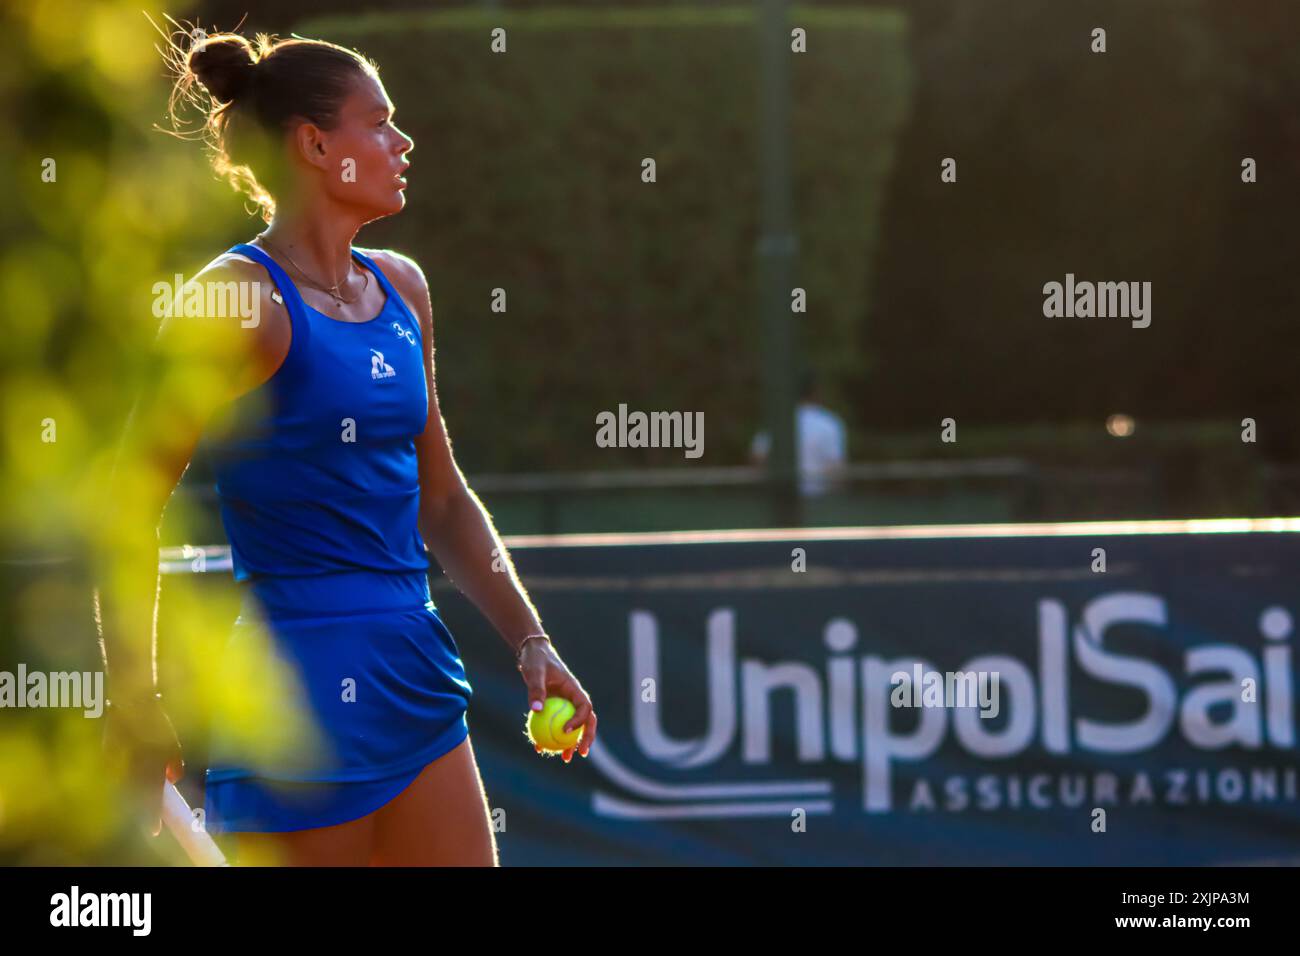 Palermo, Italy. 18th July, 2024. Chloé Paquet during the Women's Tennis Association match against María Lourdes Carlé (not pictured) at the Palermo Ladies Open 2024. Chloé Paquet beats María Lourdes Carlé 6-3 6-1. (Photo by Antonio Melita/Pacific Press) Credit: Pacific Press Media Production Corp./Alamy Live News Stock Photo